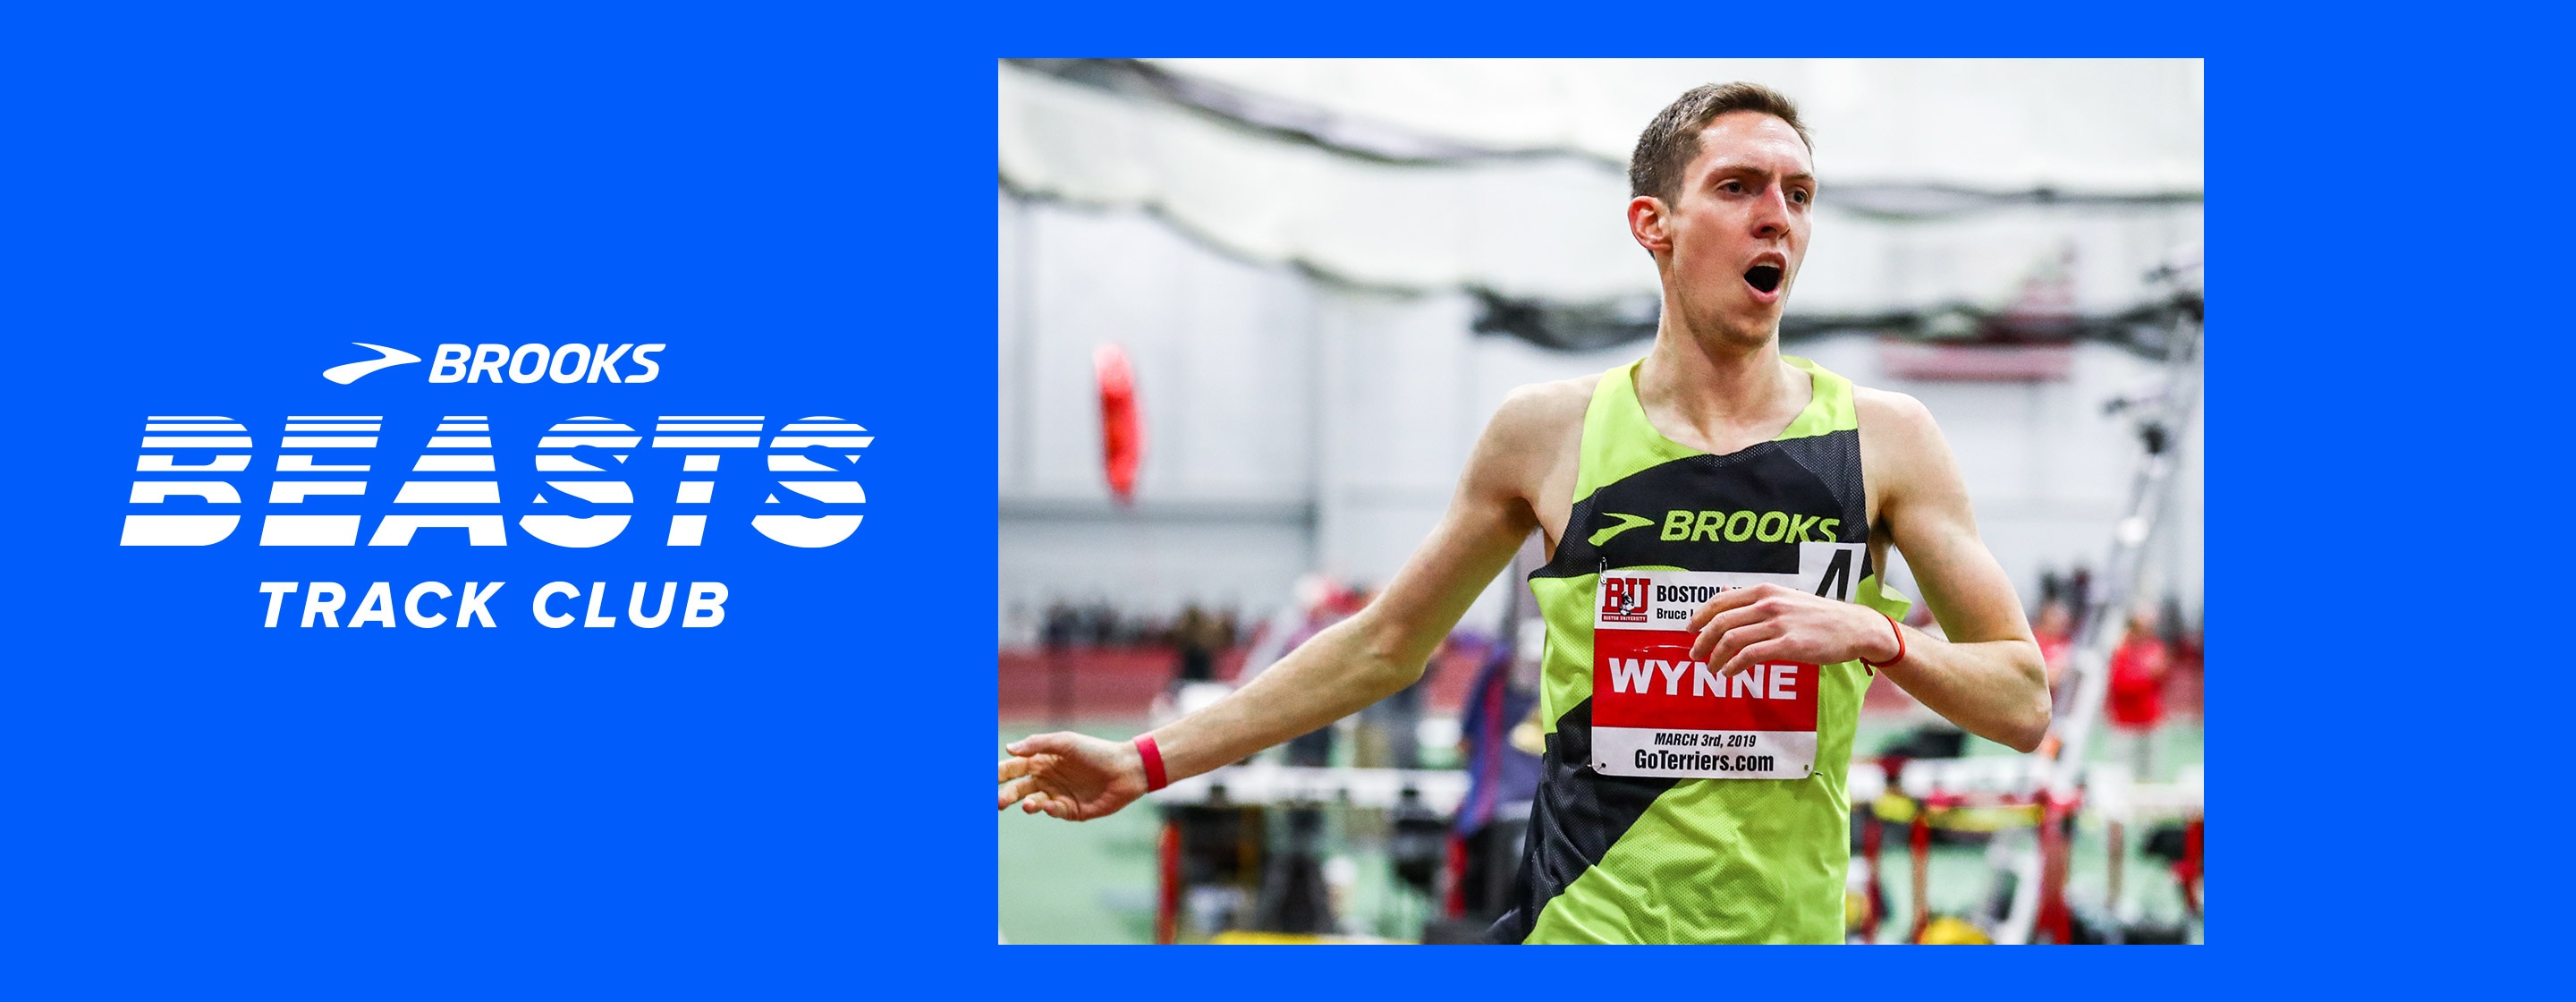 Brooks pro runner Henry Wynne celebrates finishing his race during an indoor track meet.